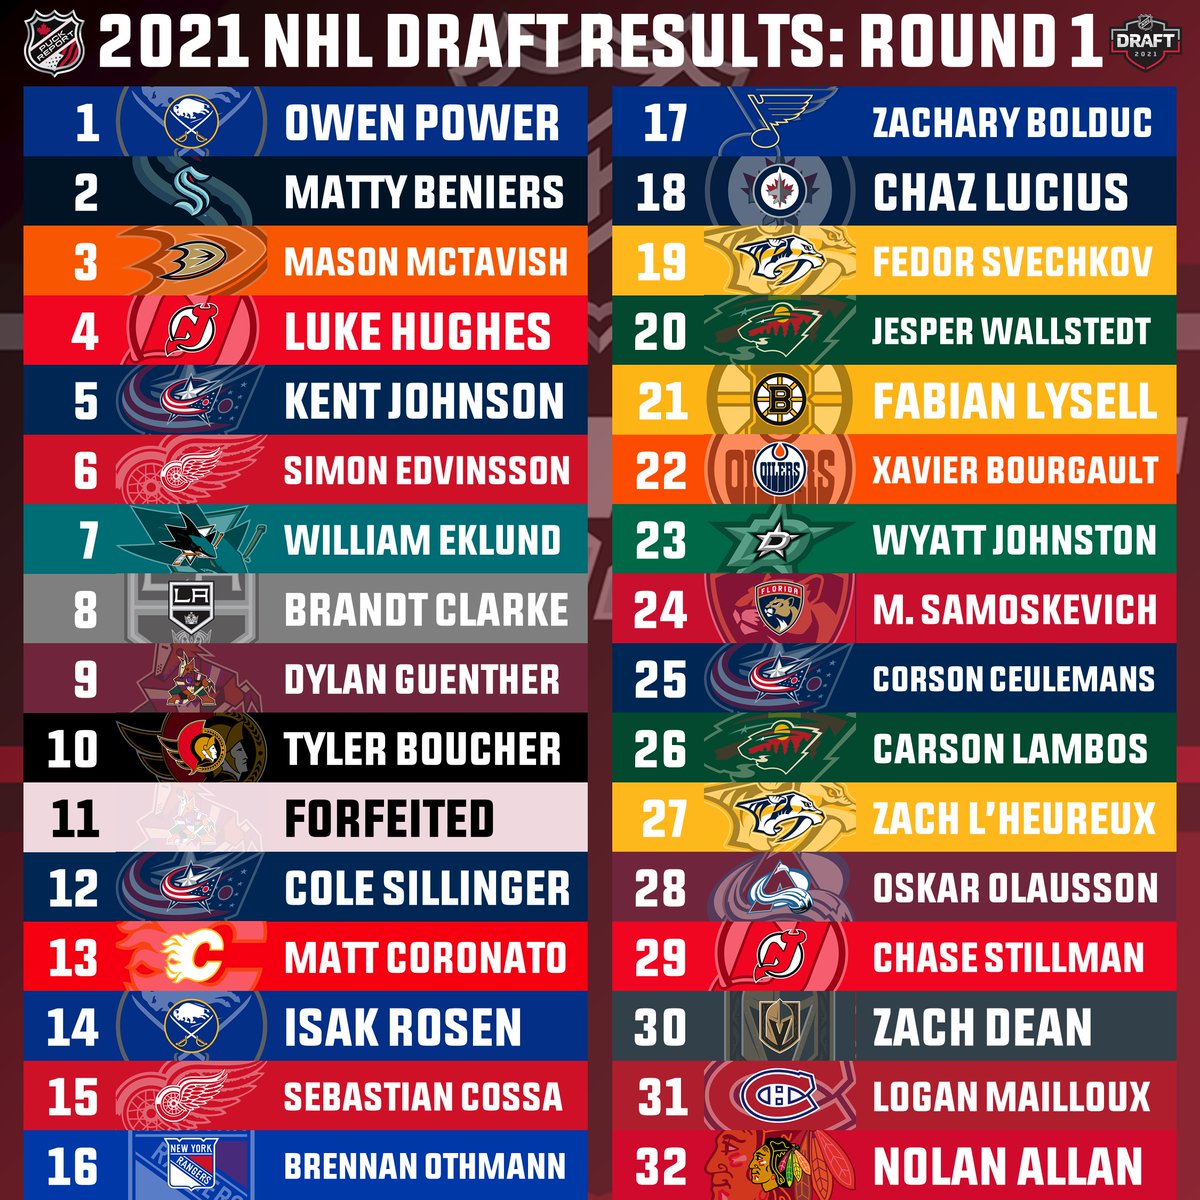 Nhl Draft 2021 Results / 2020 Nhl Draft Complete Results List Of Picks